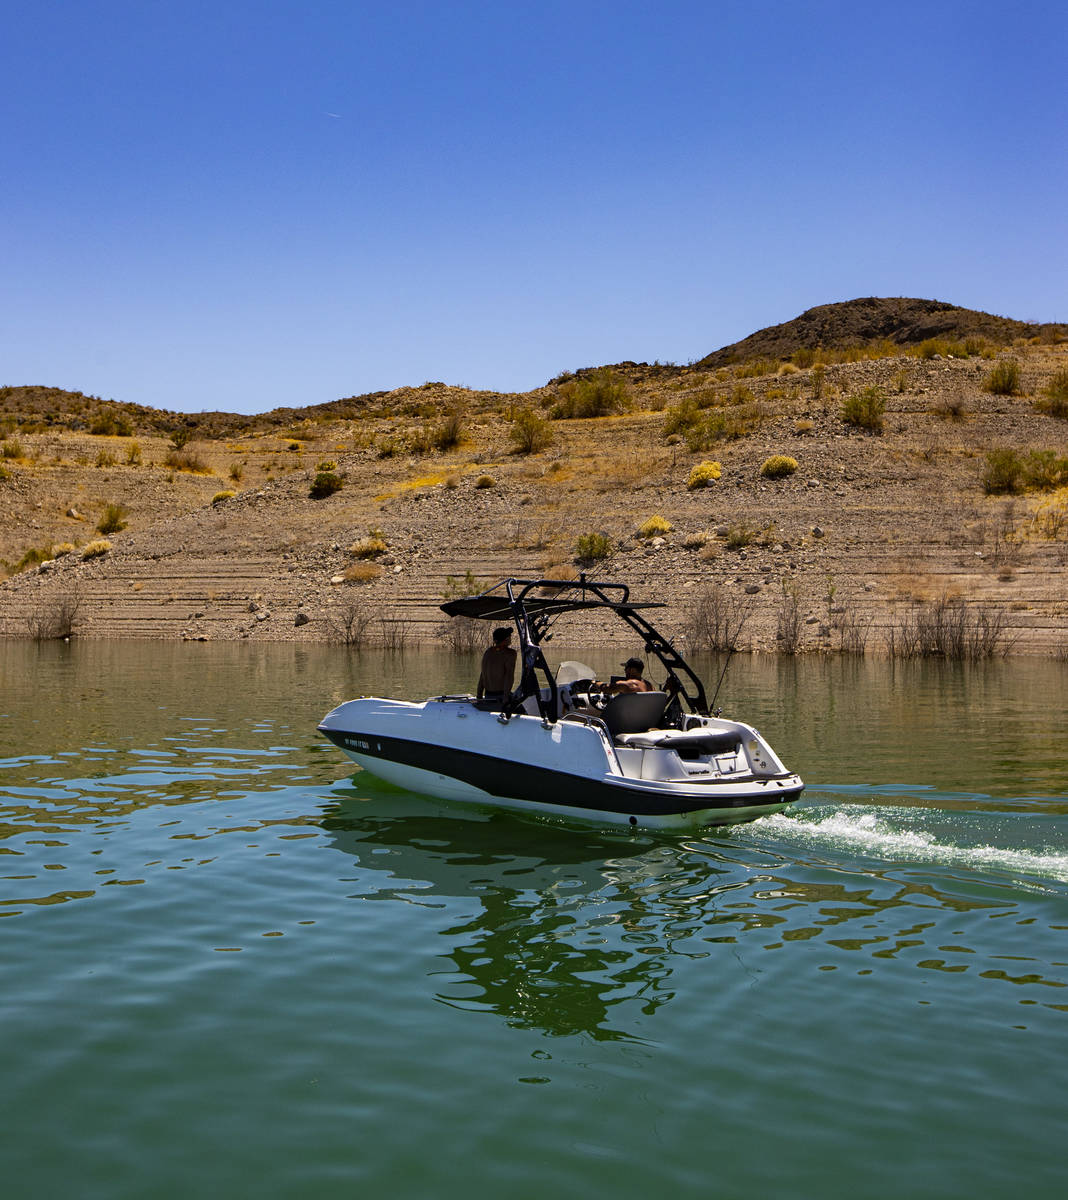 A boat passes by at the Callville Bay Marina at Lake Mead National Recreation Area on Wednesday ...